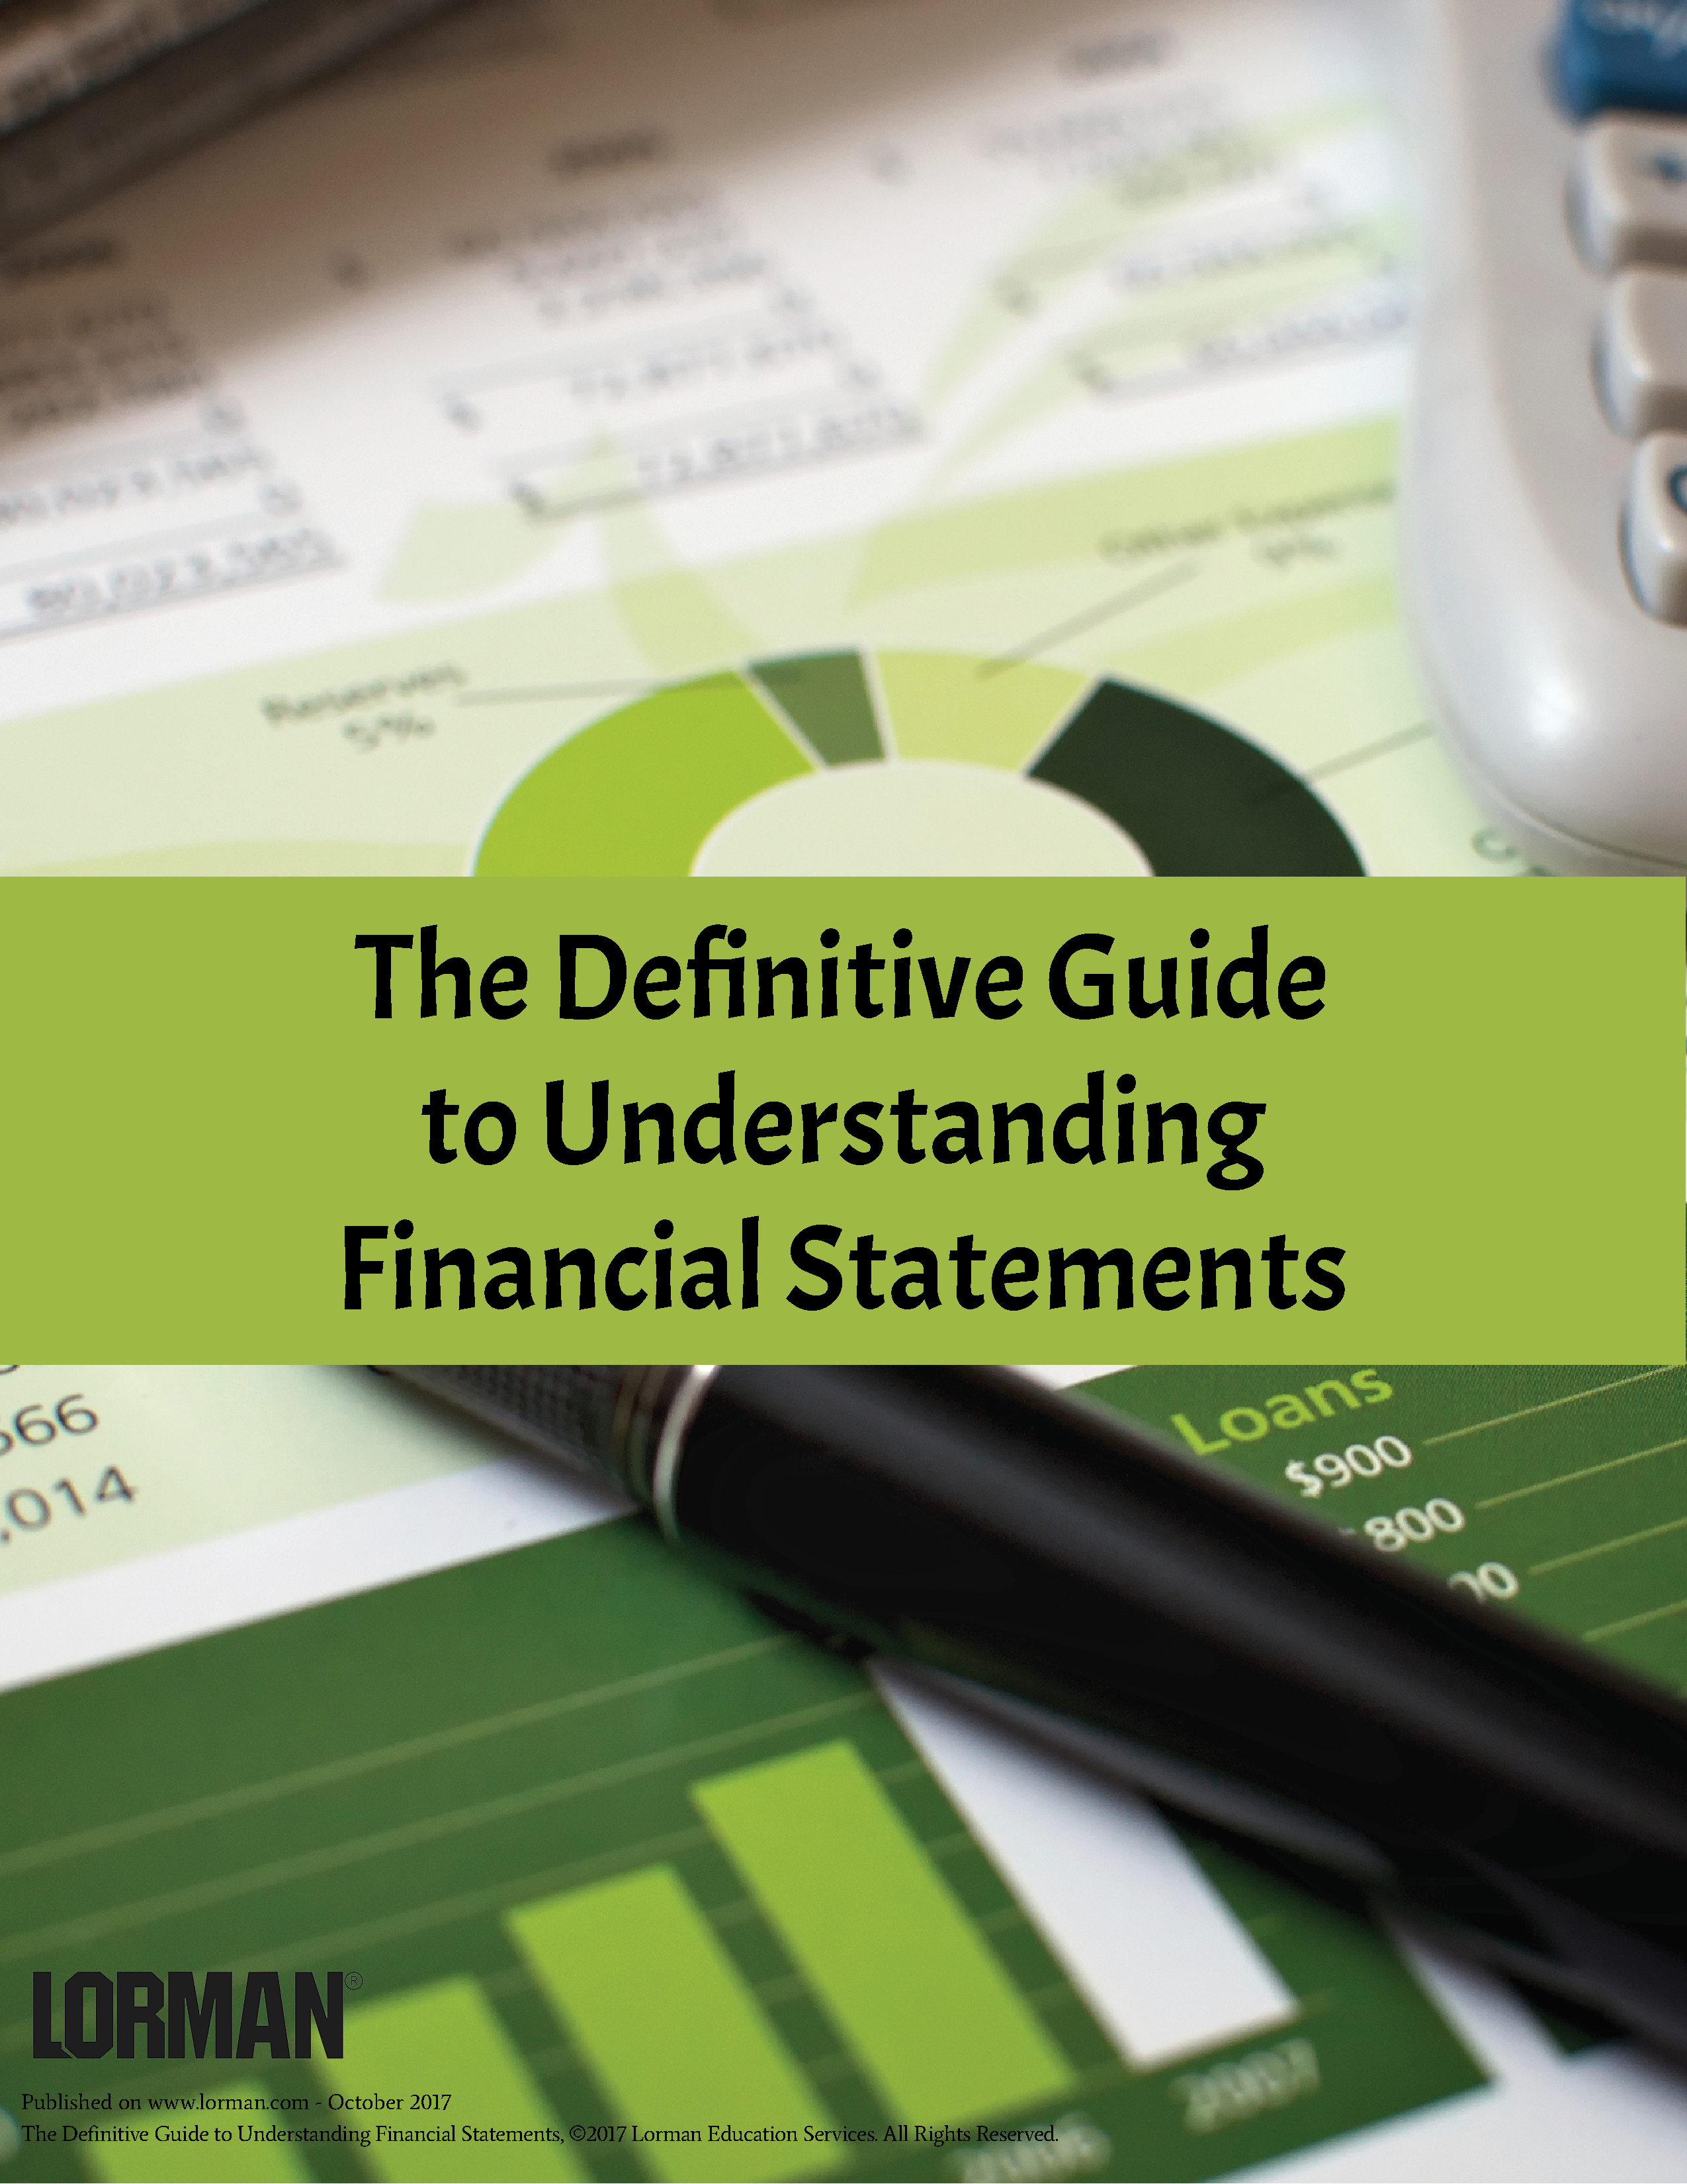 The Definitive Guide to Understanding Financial Statements